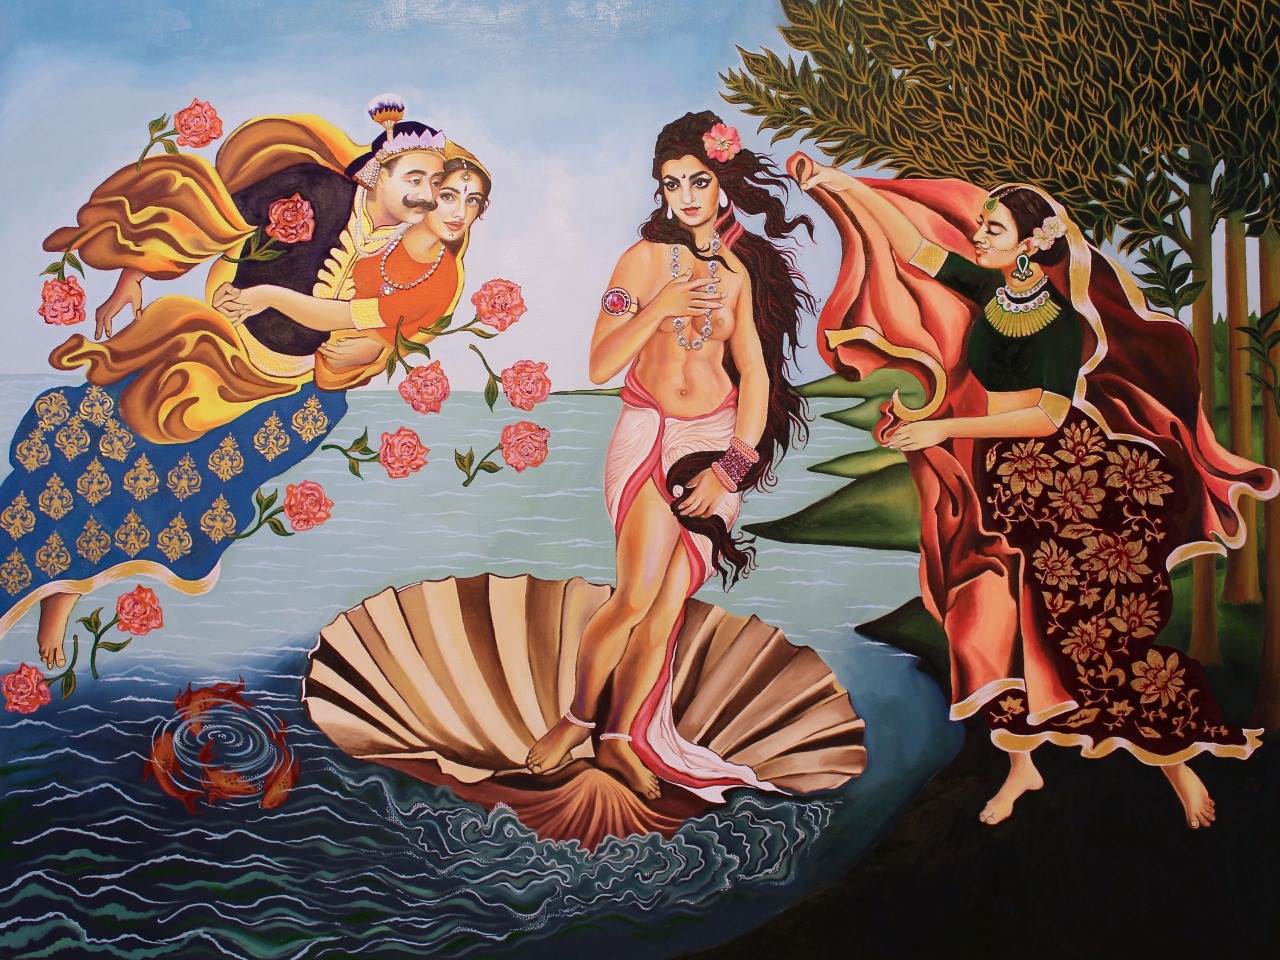 “Birth of Satyavati”
For quite some time now, my favorite painting has been “The Birth of Venus” by Sandro Botticelli. This is a classic western painting that has become symbolic of ideal beauty in the art world & in pop culture. A few years ago, I...